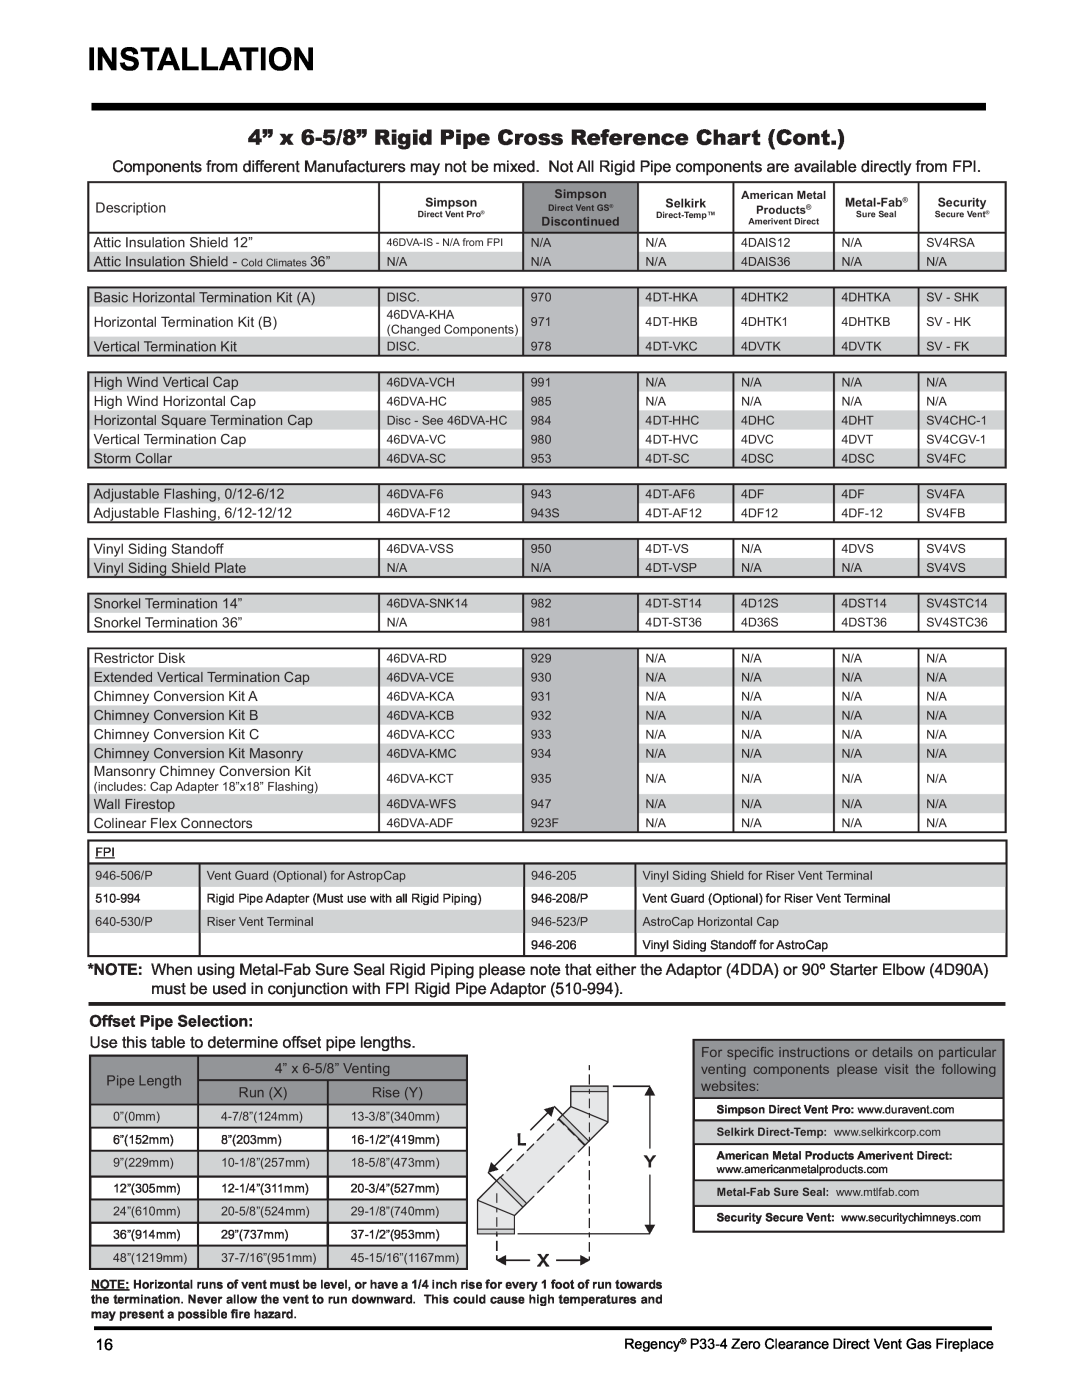 Regency P33-LP4 installation manual Installation, 4” x 6-5/8”Rigid Pipe Cross Reference Chart Cont, Offset Pipe Selection 